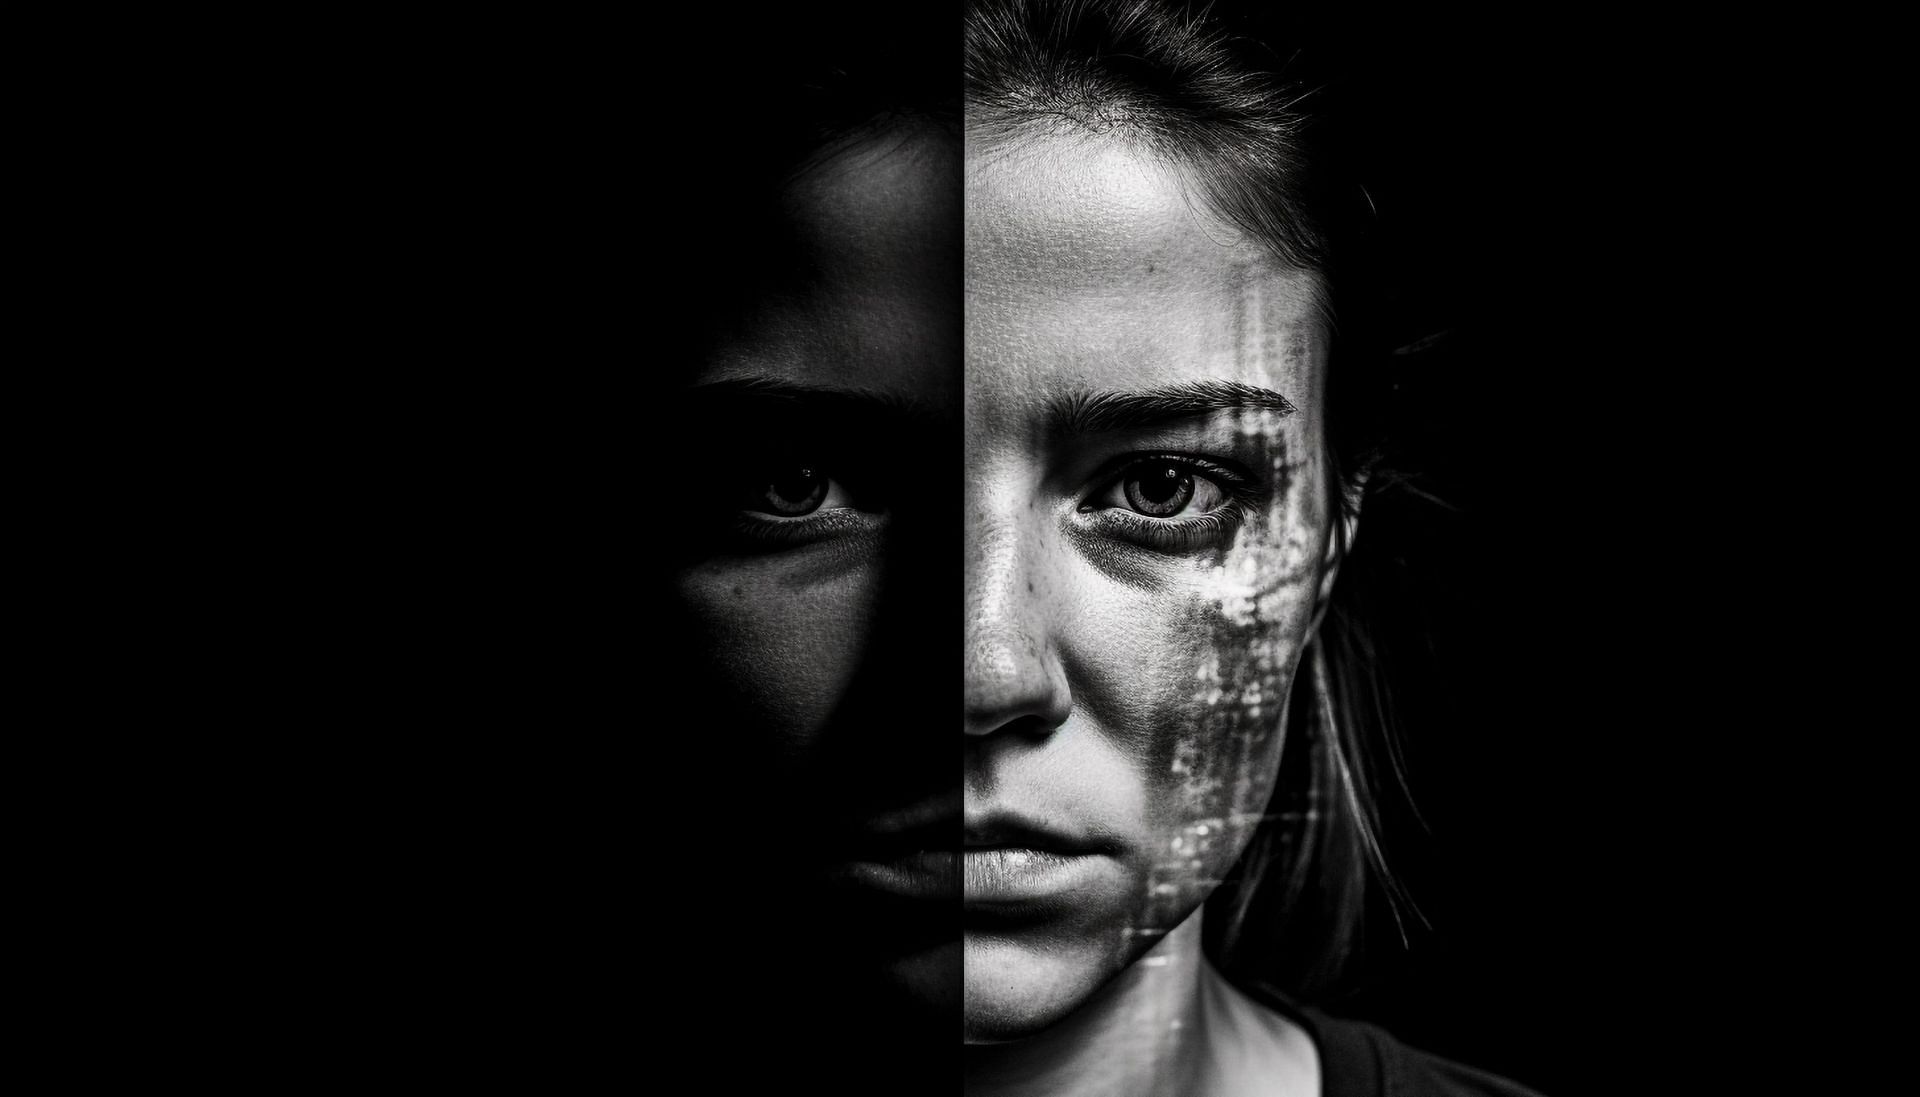 The key differences between psychopath vs sociopath can help you in deciding your treatment plan. (Image via Vecteezy/Giuseppe Ramos)